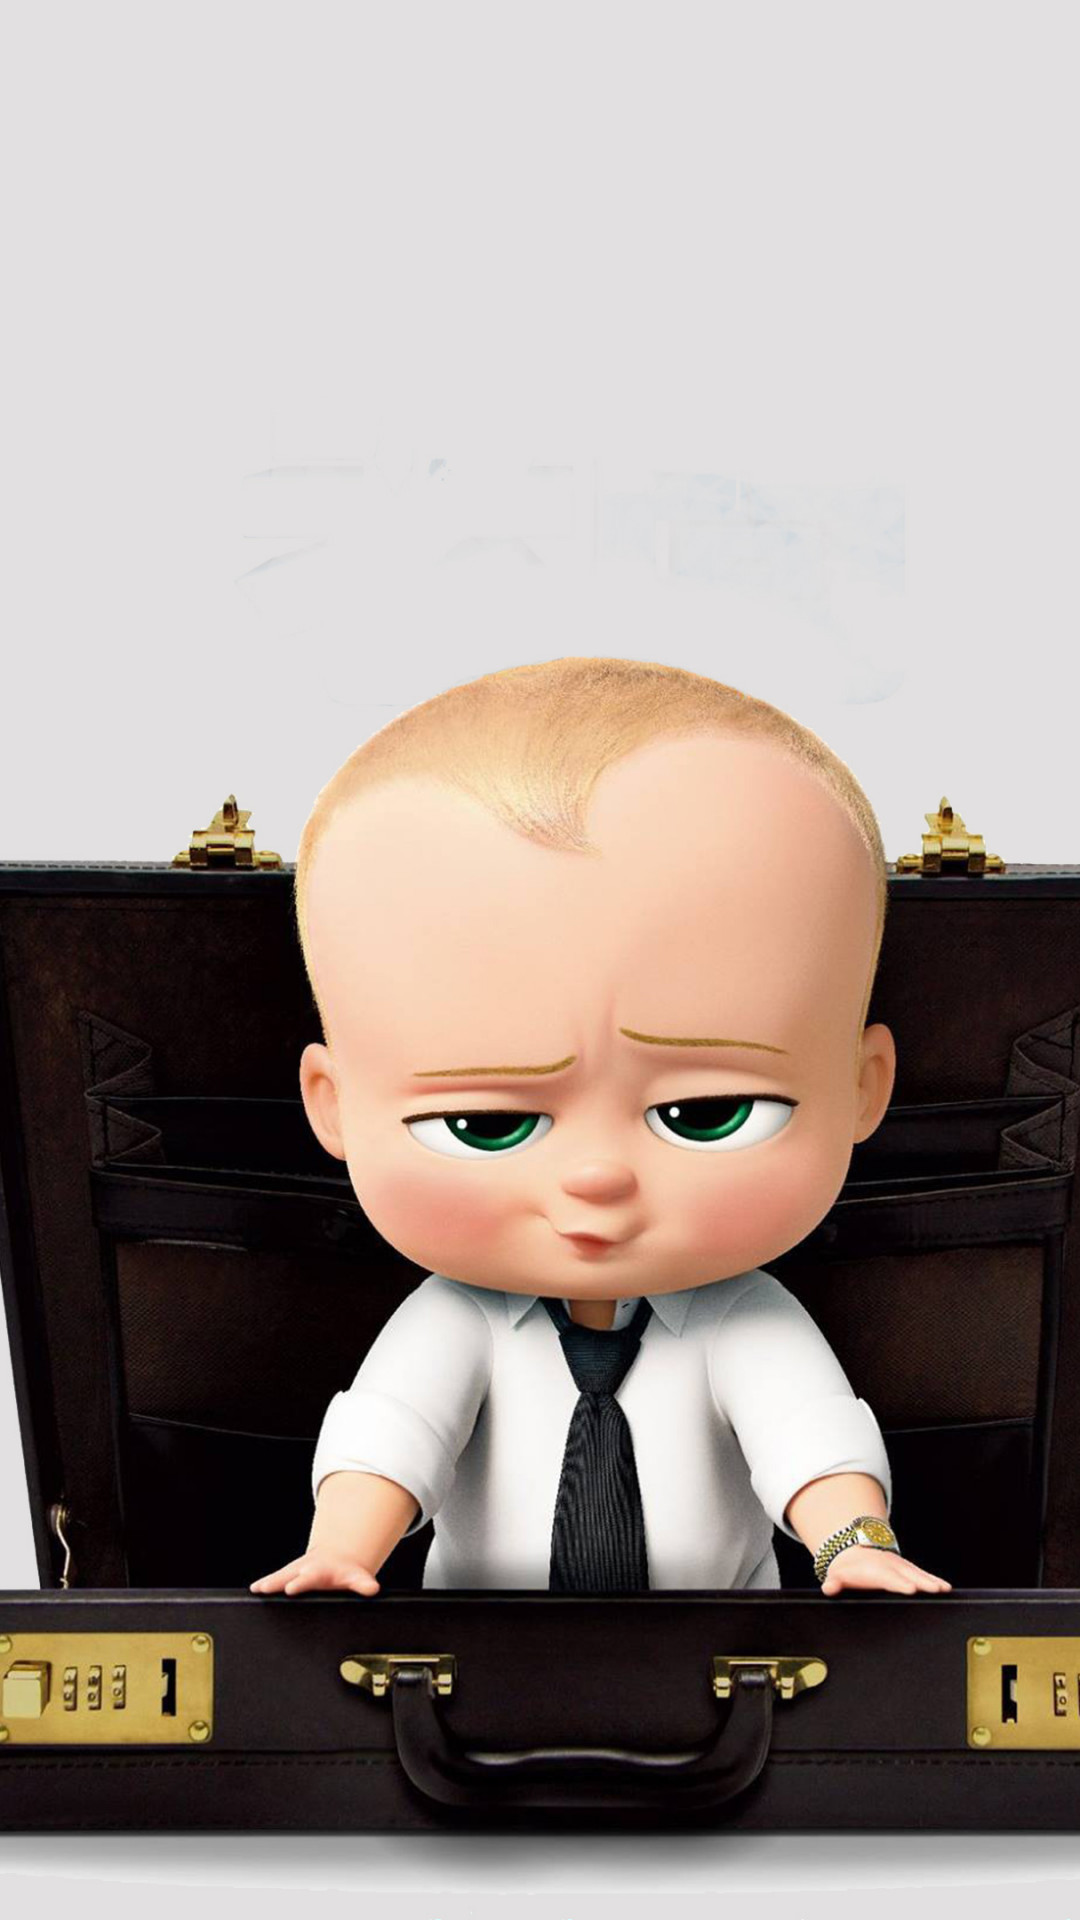 Wallpaper The Boss Baby, Baby, costume, best animation movies, Movies